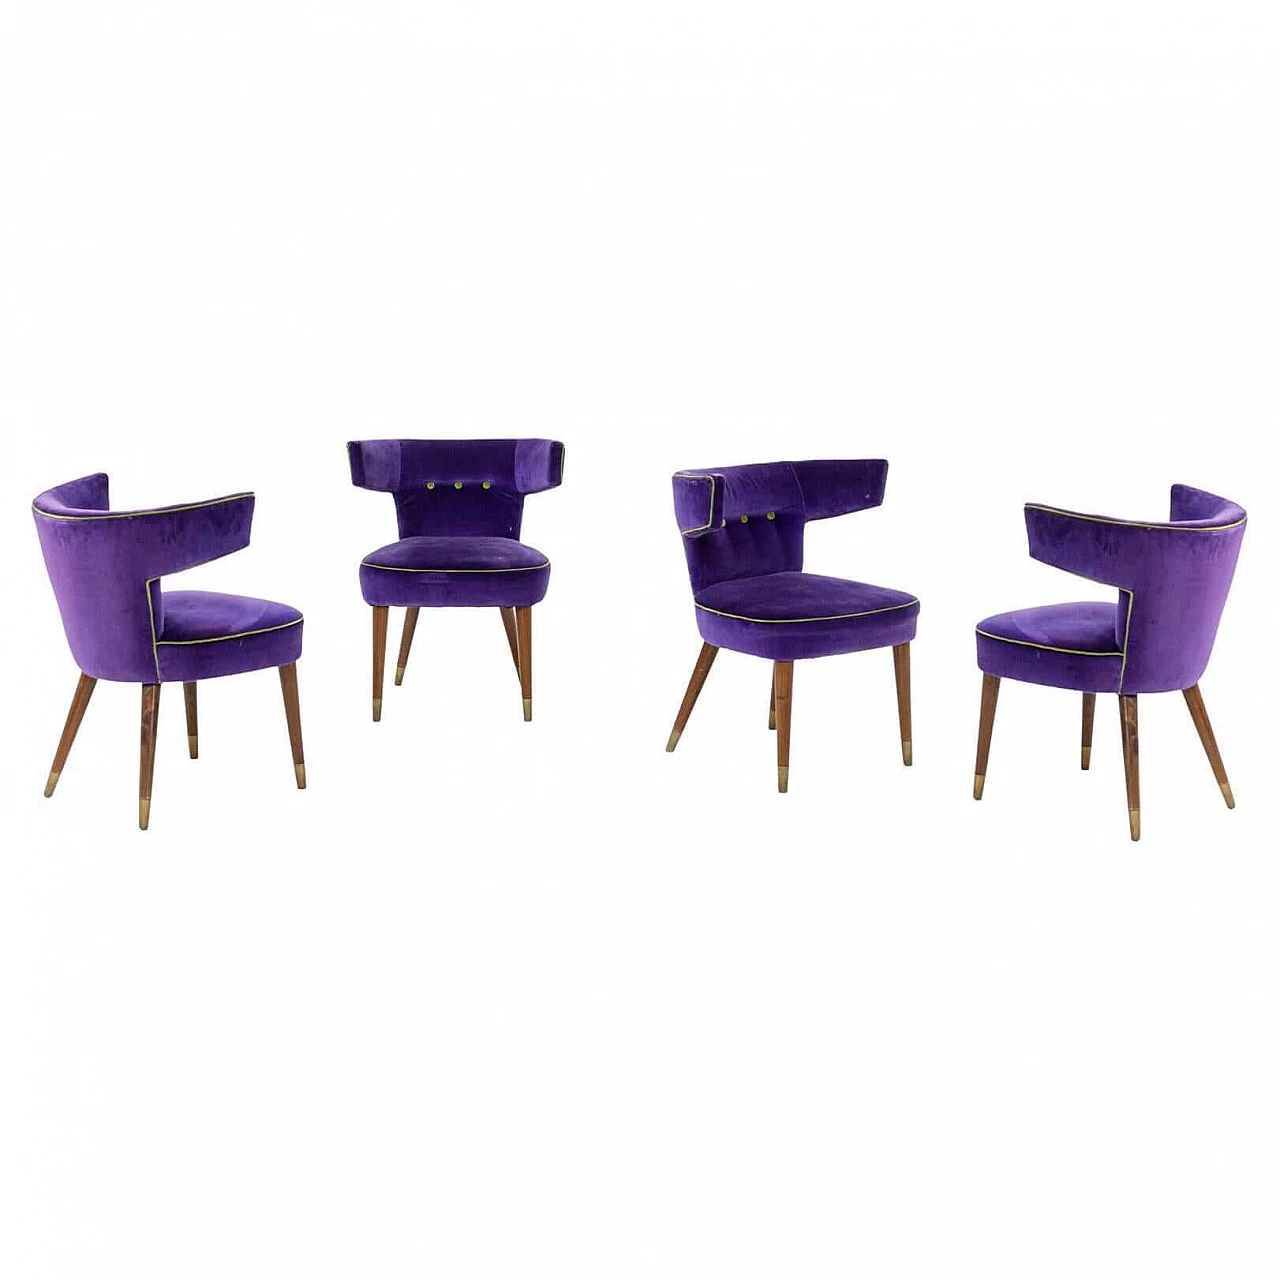 4 Violet velvet armchairs by Gio Ponti and Nino Zoncada for Cassina, 1950s 1412916